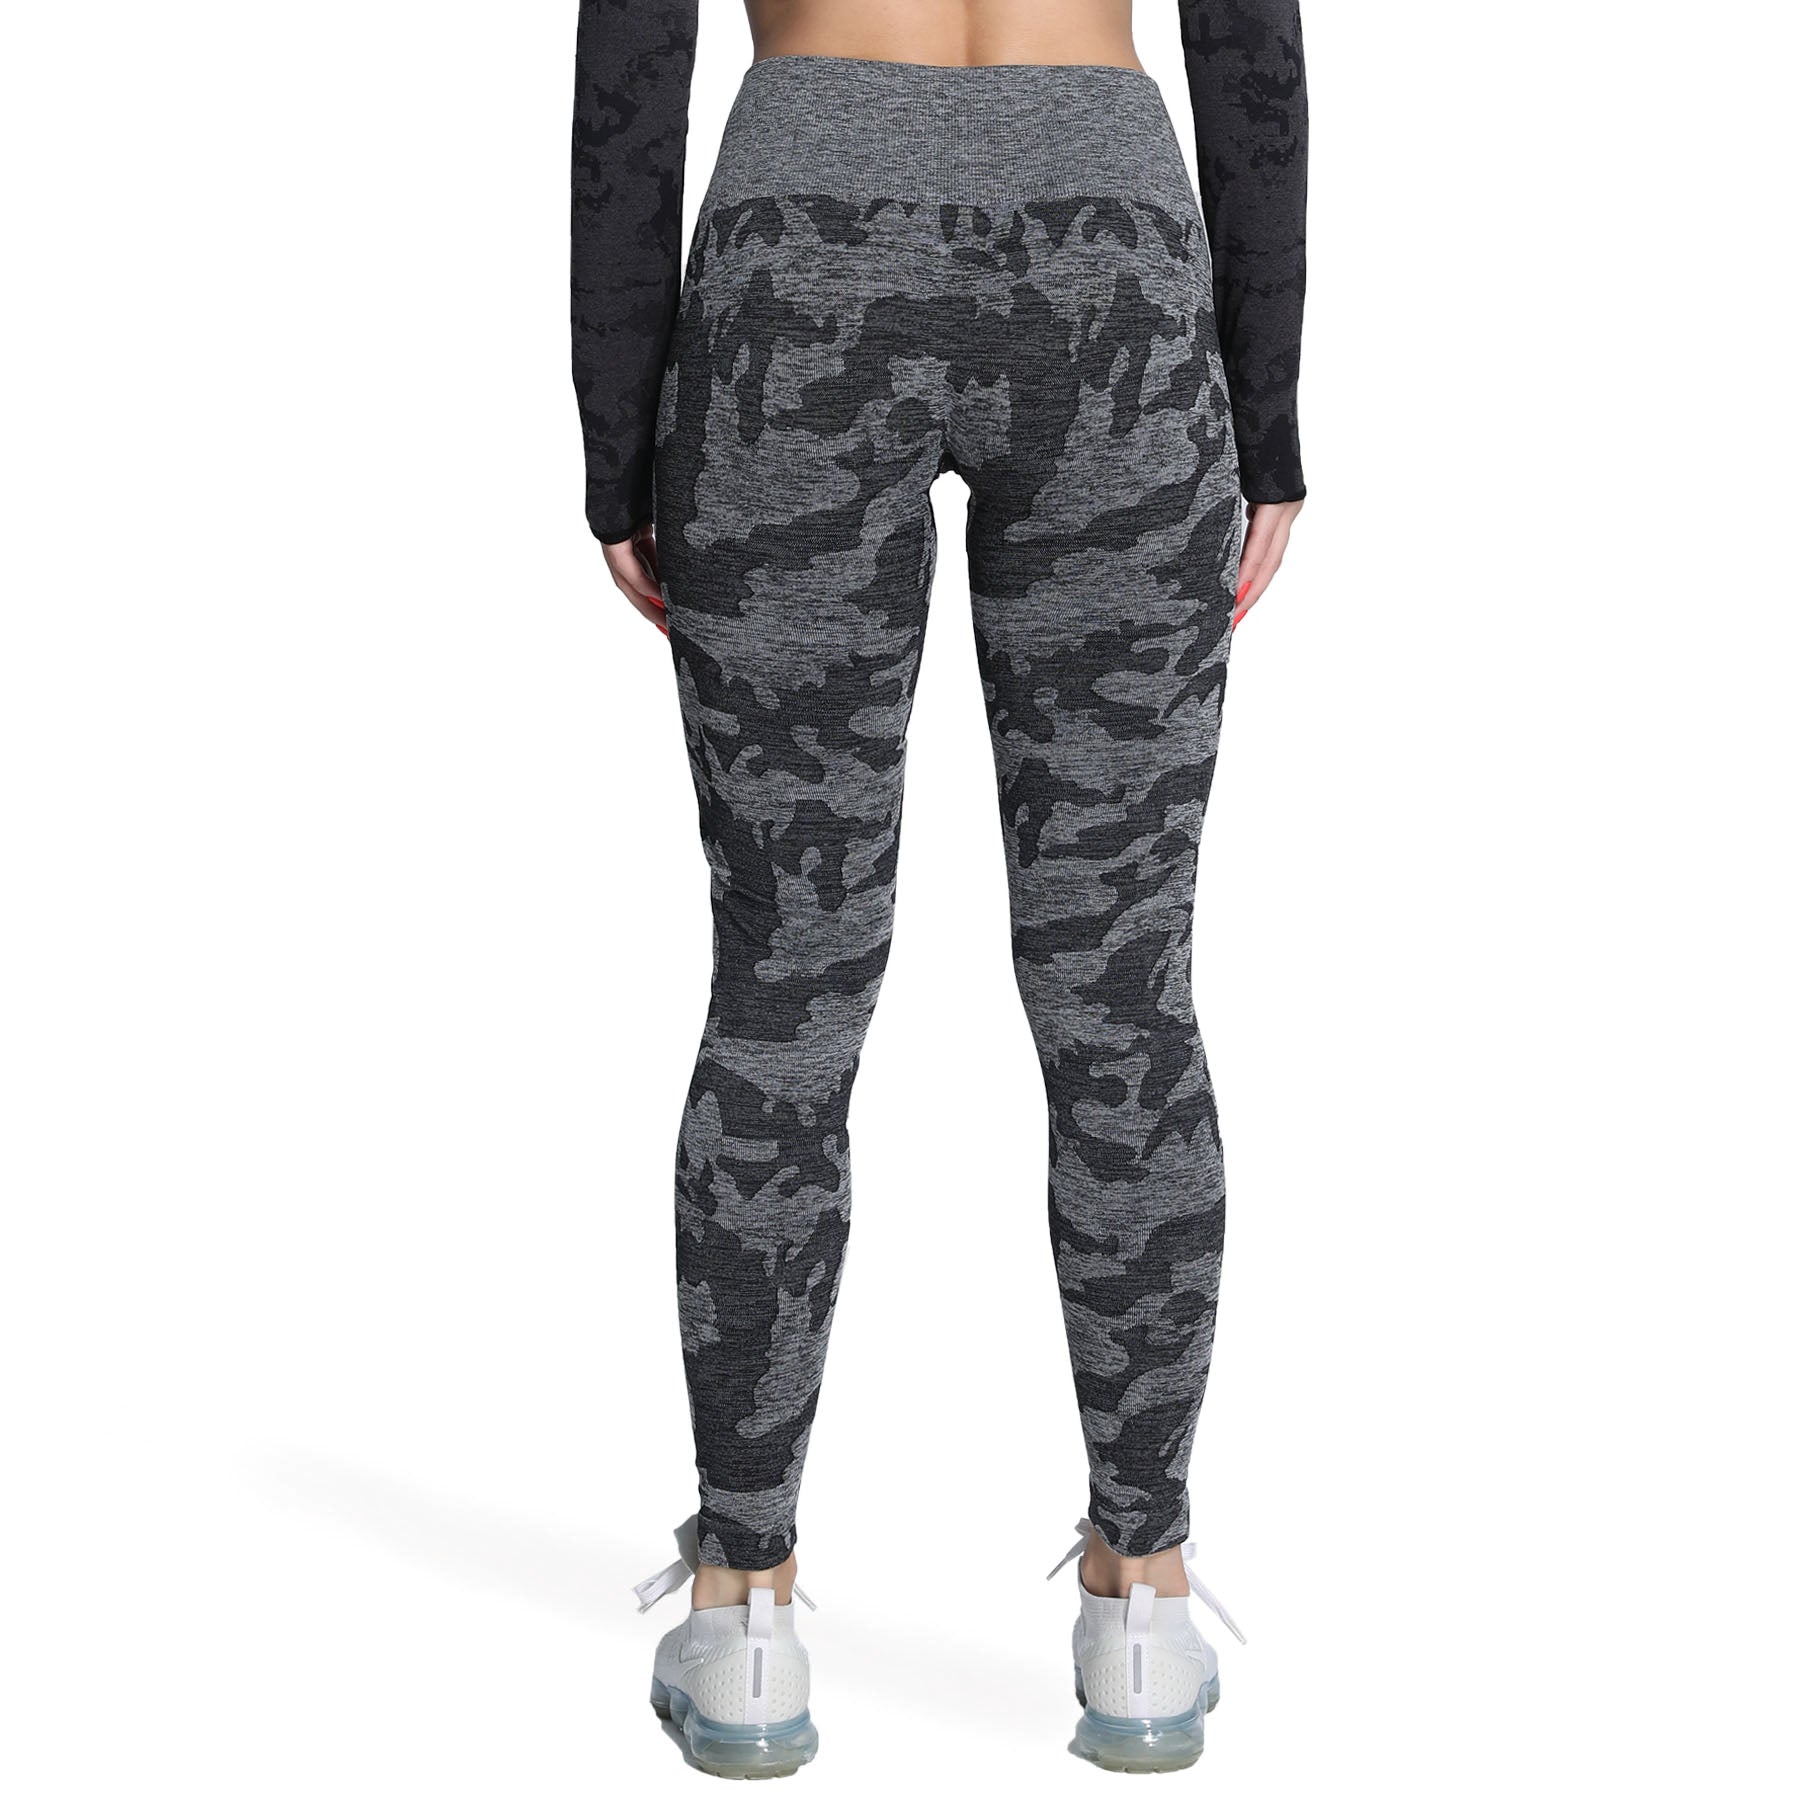 Gymshark Adapt Seamless Camo Camouflage Leggings in Light Pink